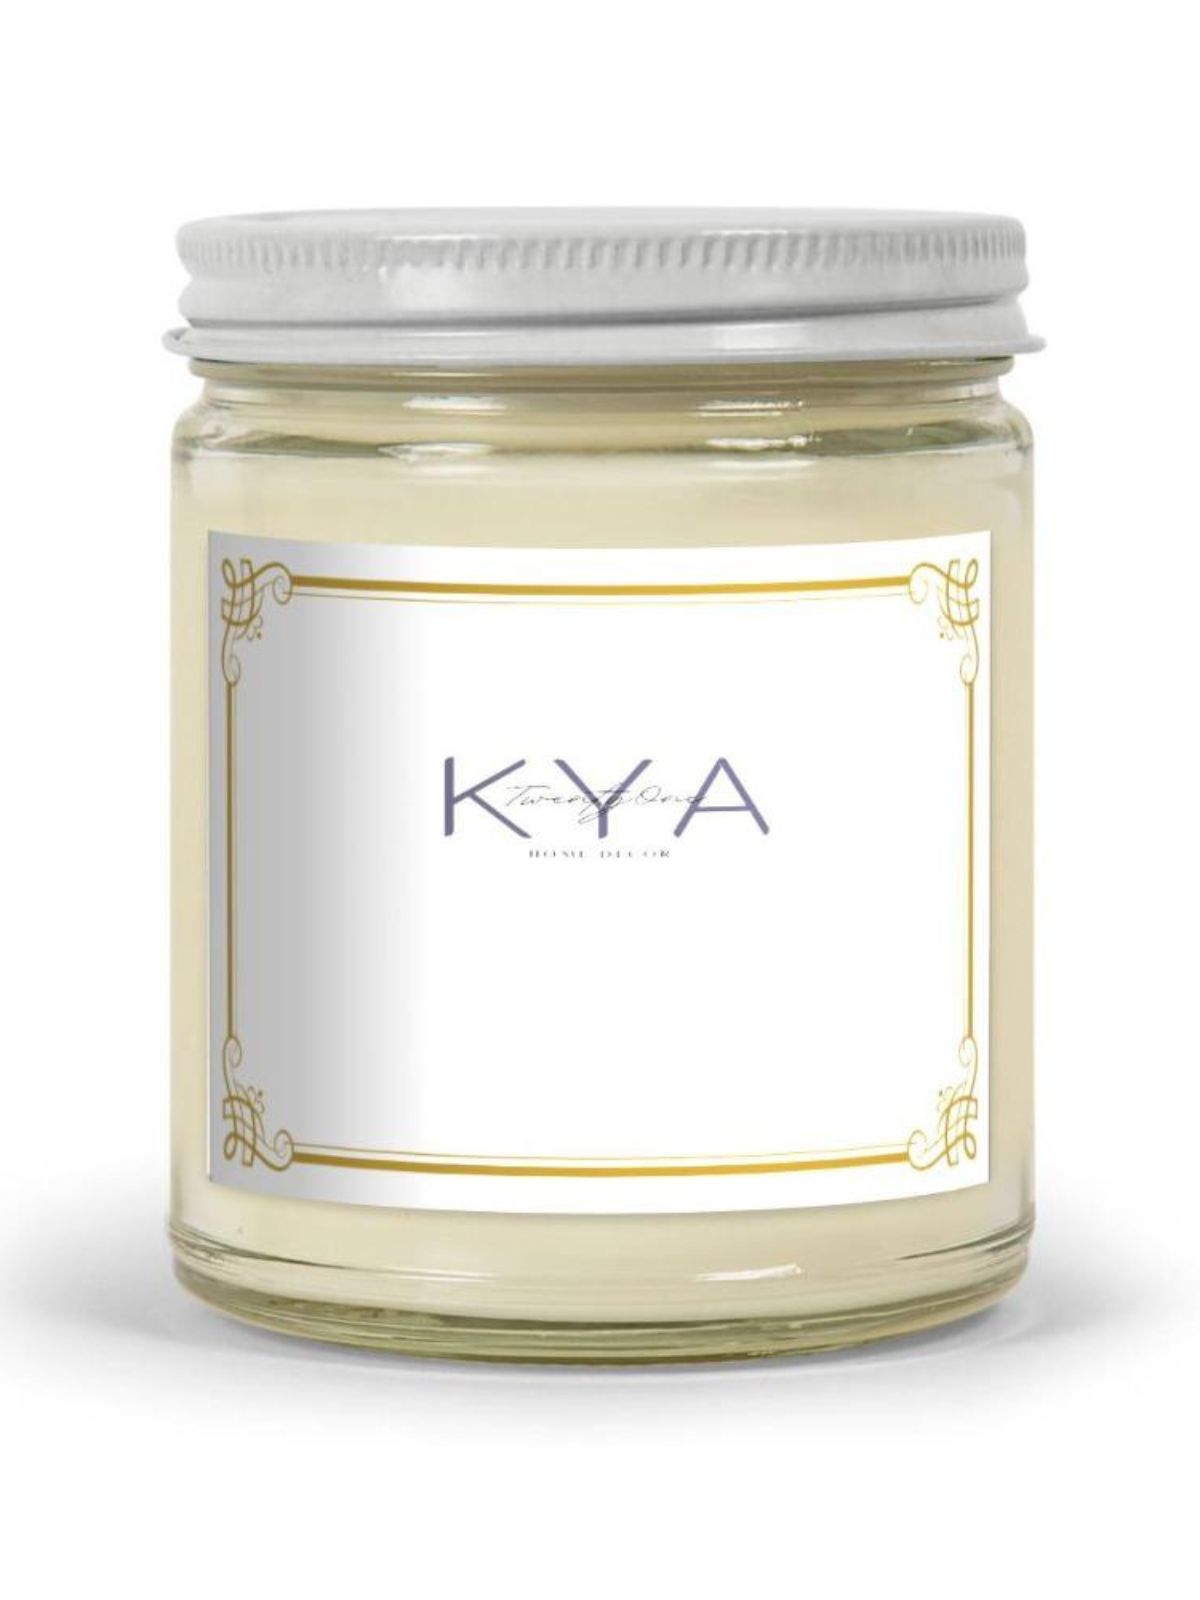 KYA Scented Candles are created in the USA using a 100% natural soy wax blend